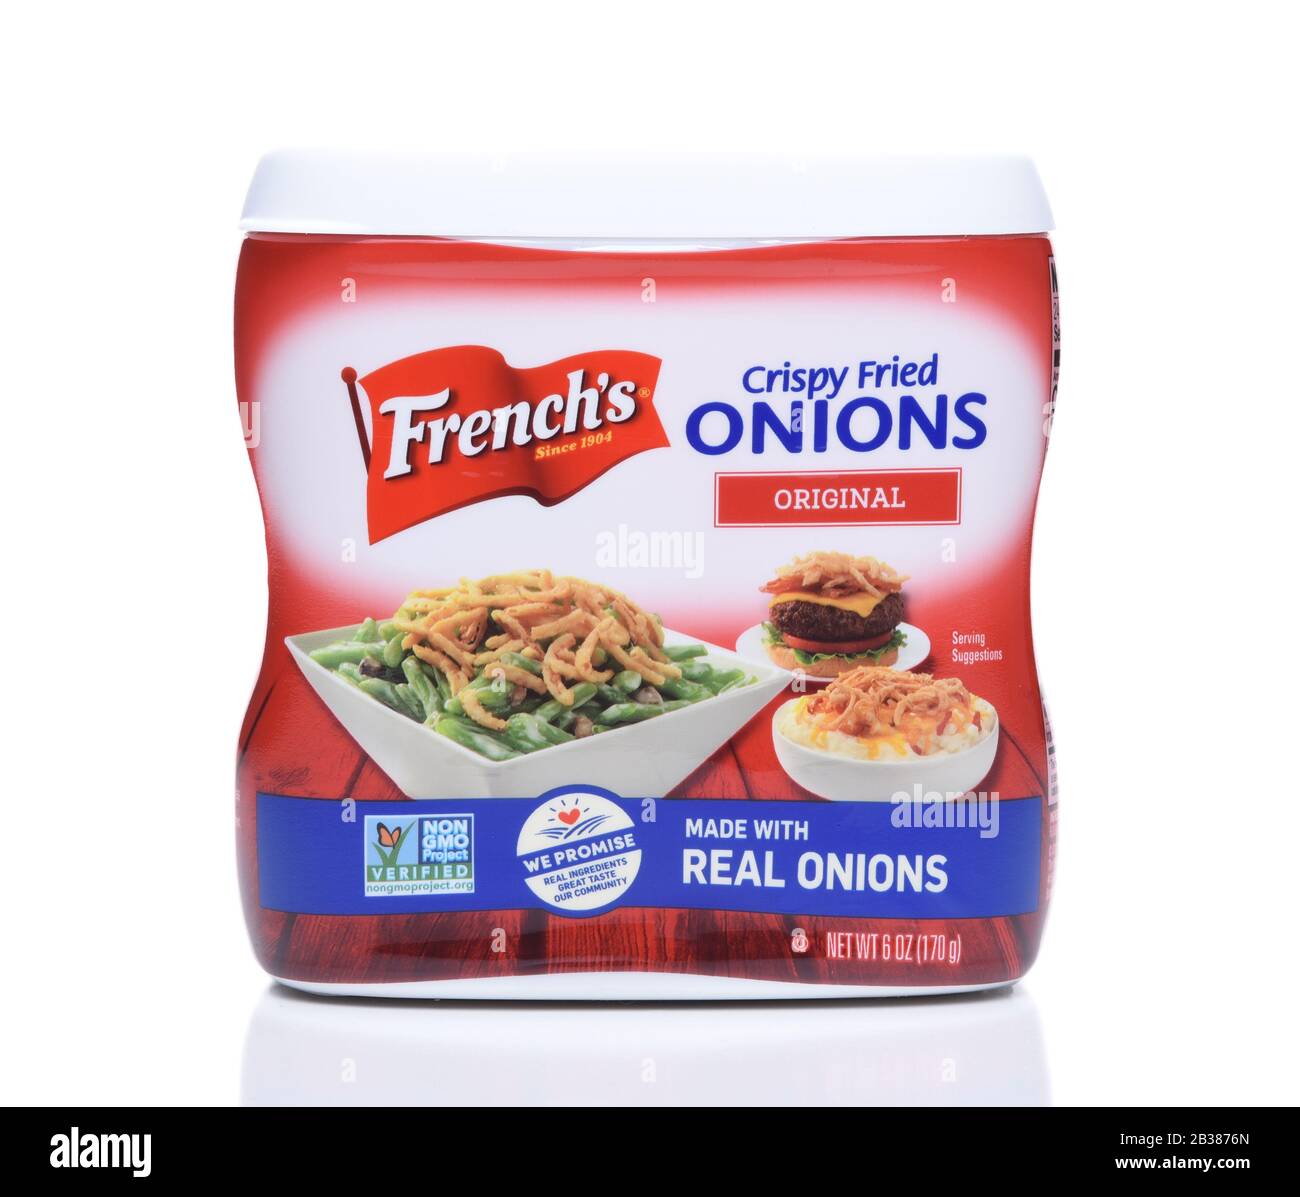 IRVINE, CALIFORNIA - DEC 4, 2018: Frenchs Crispy Fried Onions. The topping is popular in casseroles, salads, burgers and soups. Stock Photo